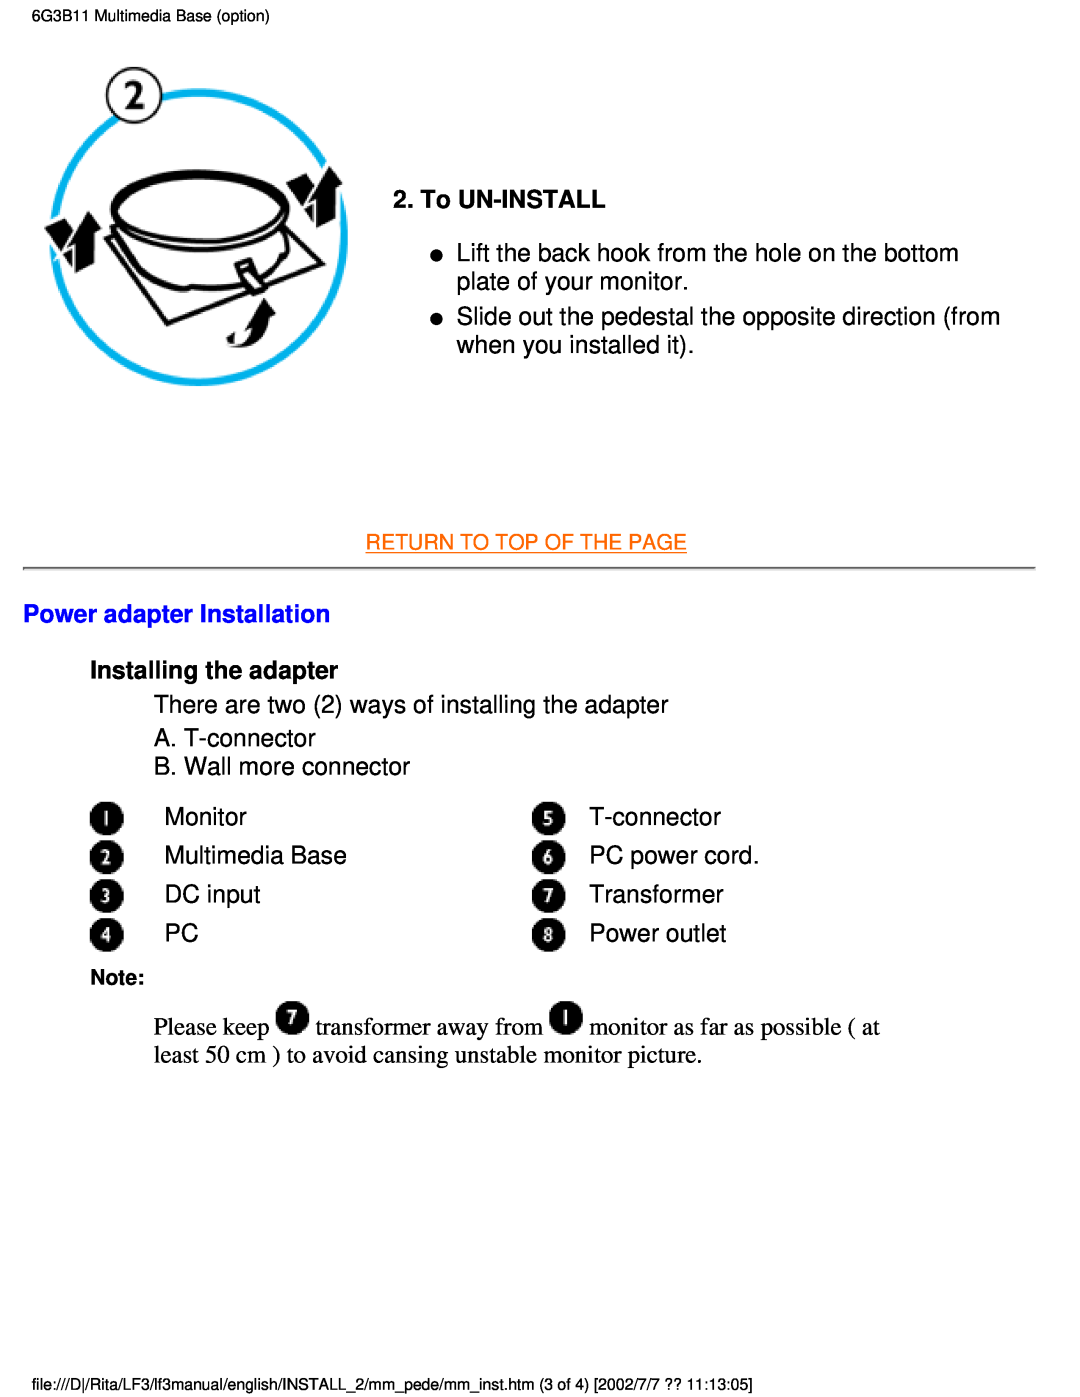 Philips 107T41 user manual To UN-INSTALL, Power adapter Installation, Installing the adapter 